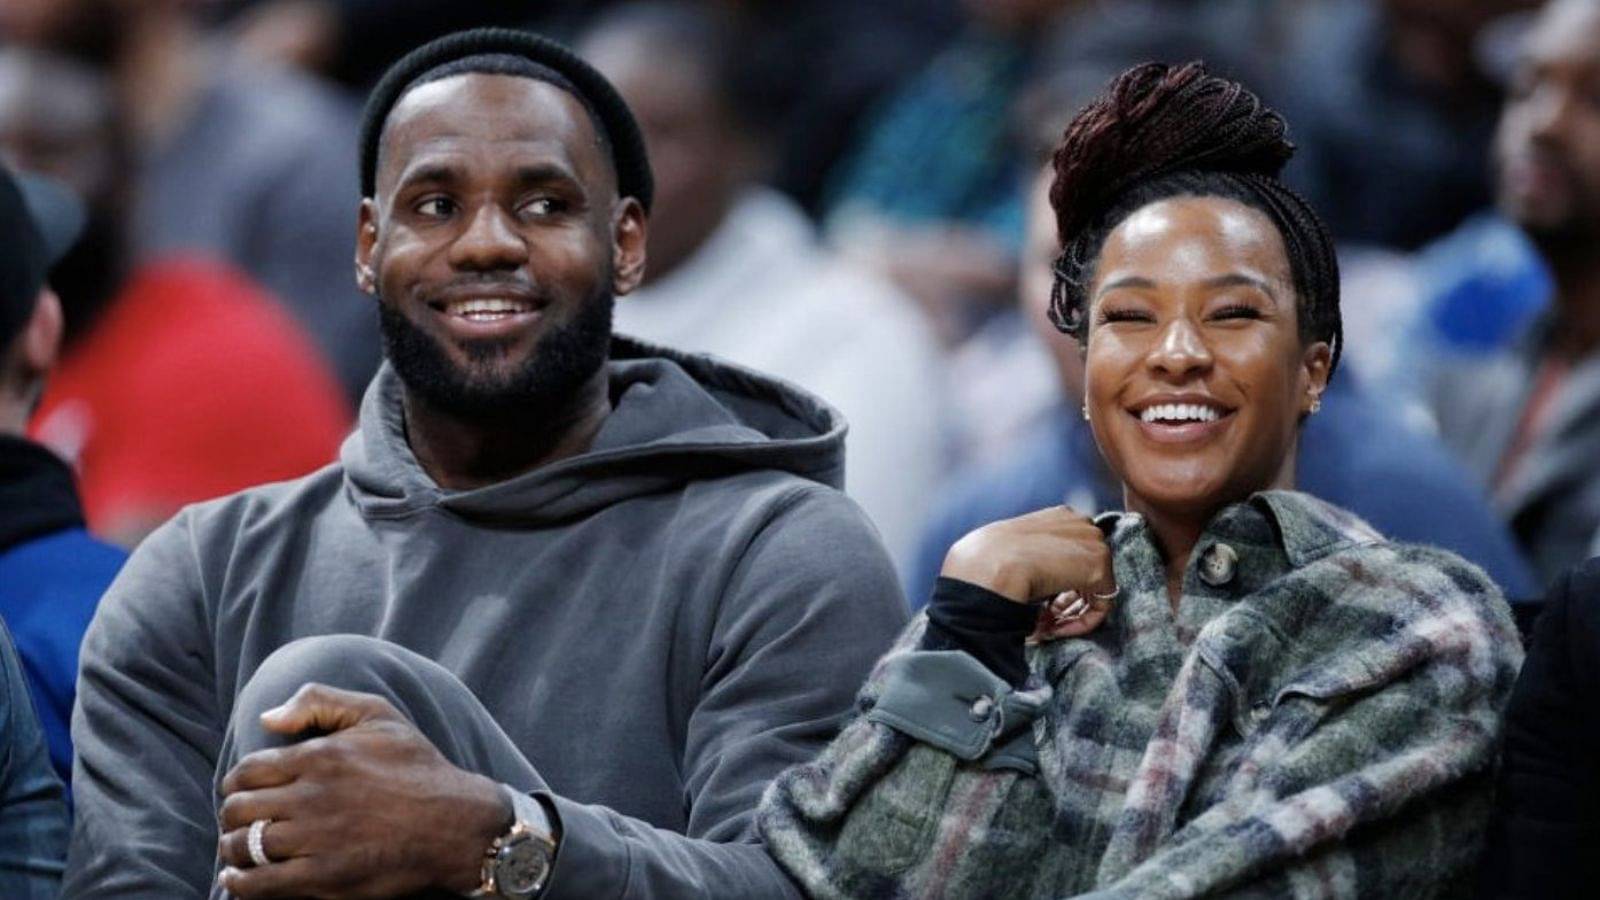 "Do I miss Miami, the city or the team? Savannah misses the city!": LeBron James gets aided by wife in answering a question by SportsCenter on Instagram live